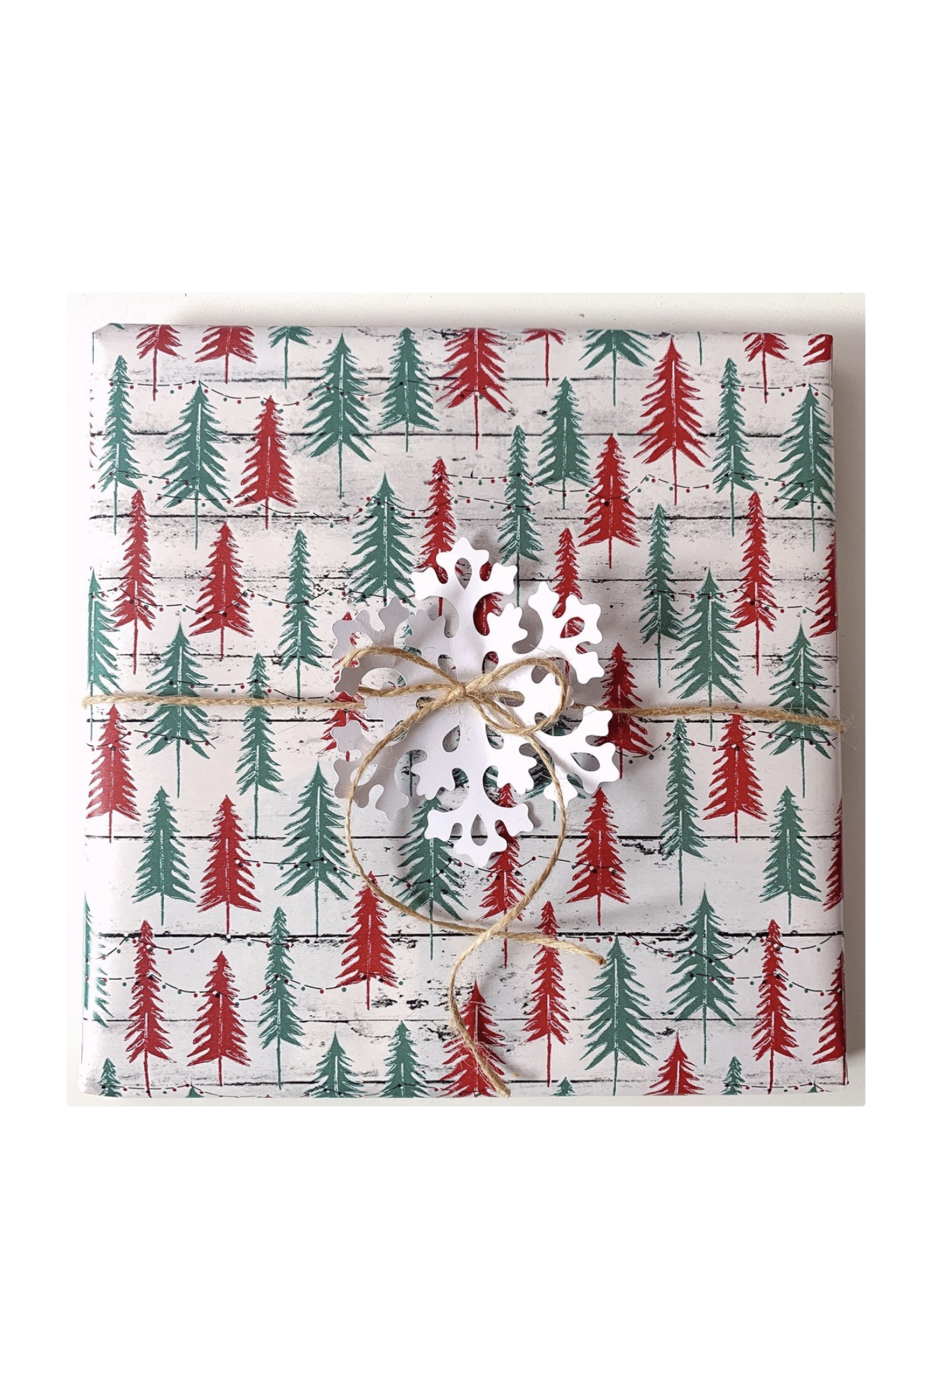 Buy 100 Pieces Set Christmas Tags with String Perfect for Labeling Your  Surprises - 10 Different Designs Kraft Paper Tags with Twine Included Great  for Present Wrapping, Baked Goods Tags, Price Tags